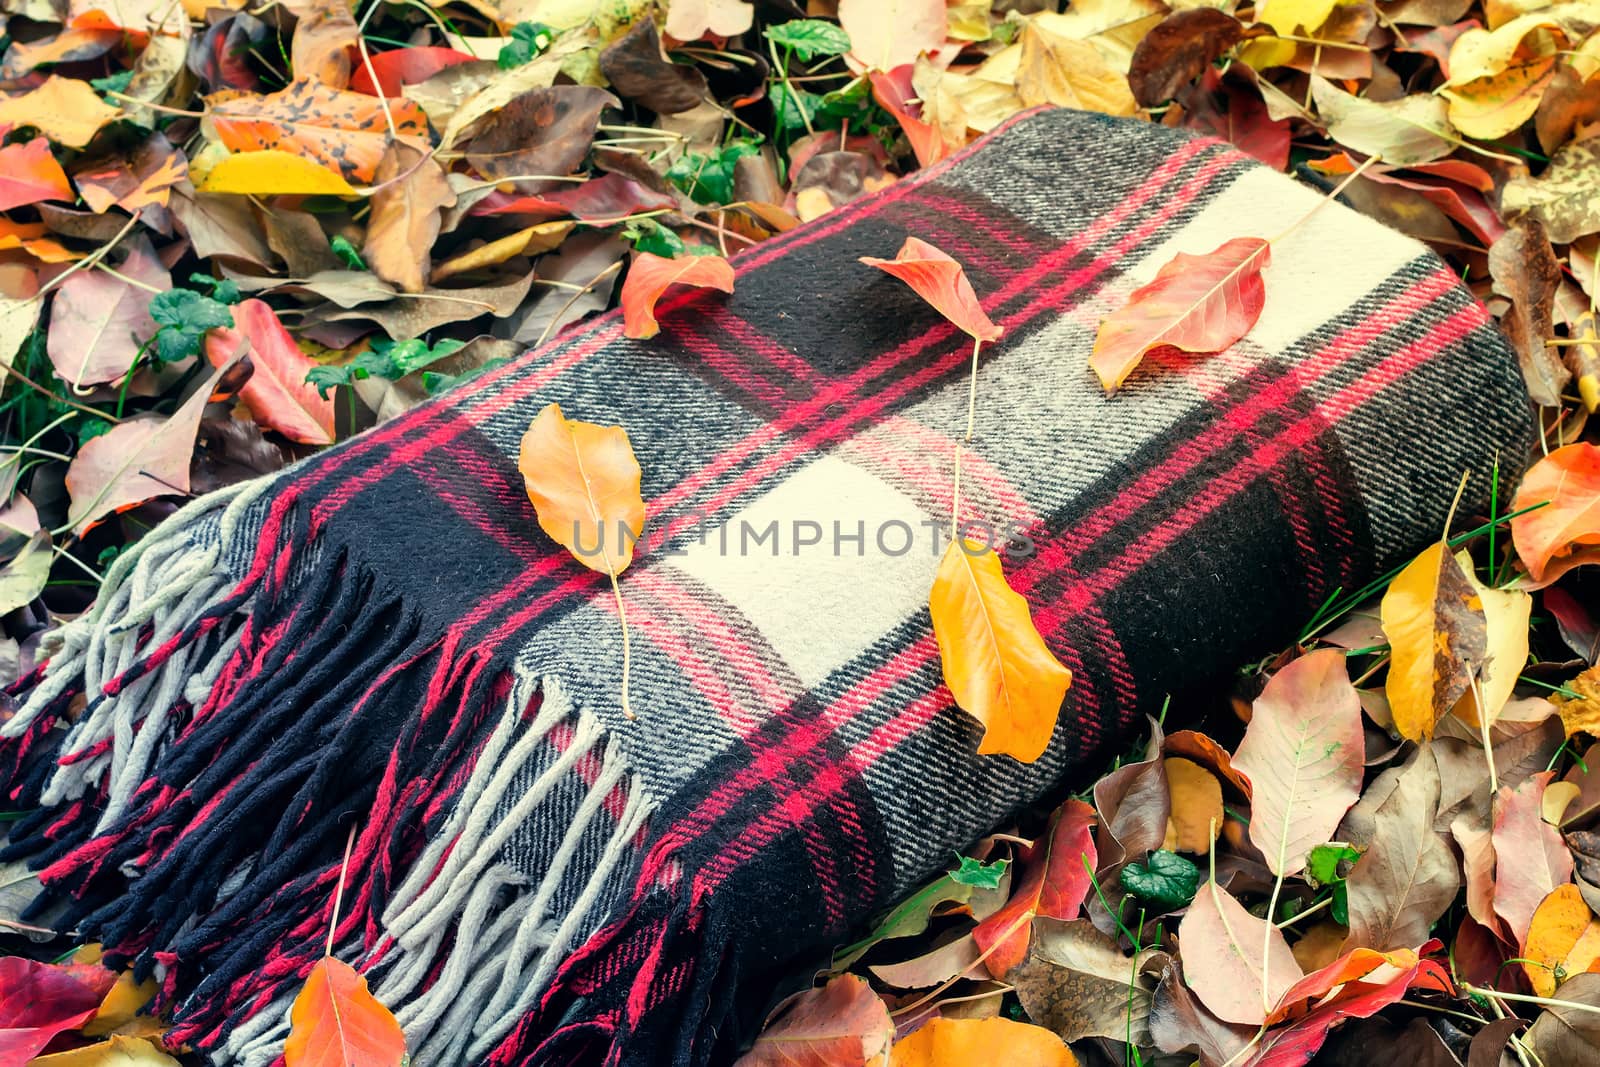 On the ground among the grass and fallen leaves is a warm plaid blanket, prepared to stay during the picnic.